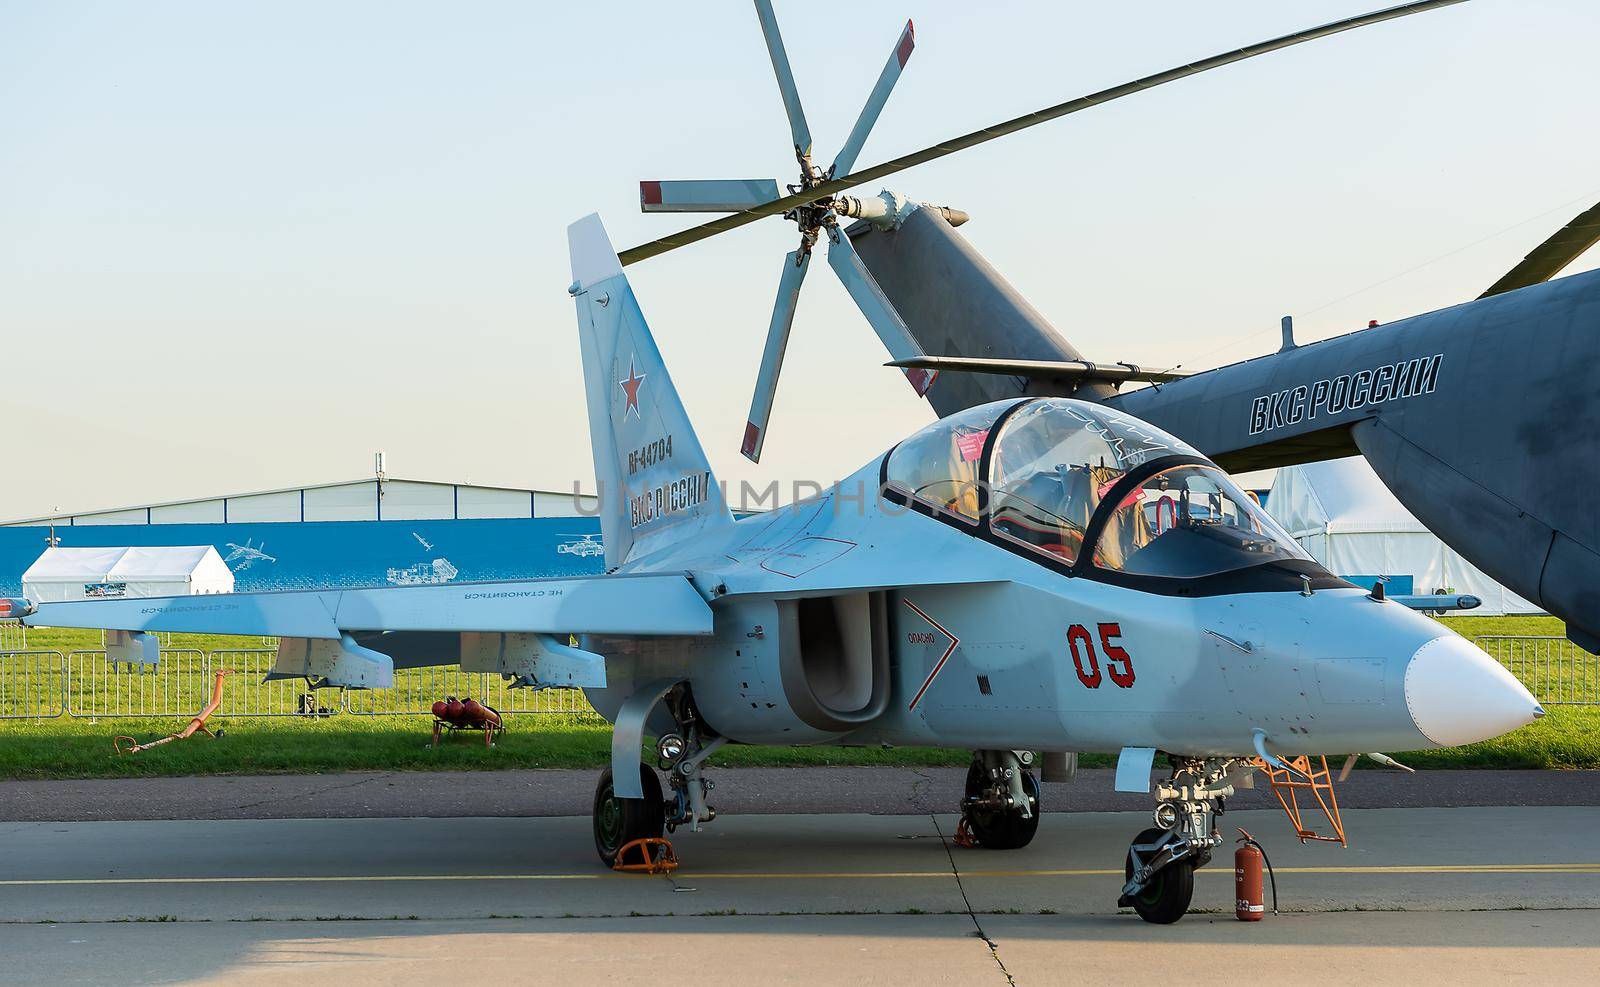 August 30, 2019, Moscow region, Russia. Russian Yakovlev Yak-130 combat training aircraft at the International aviation and space salon.